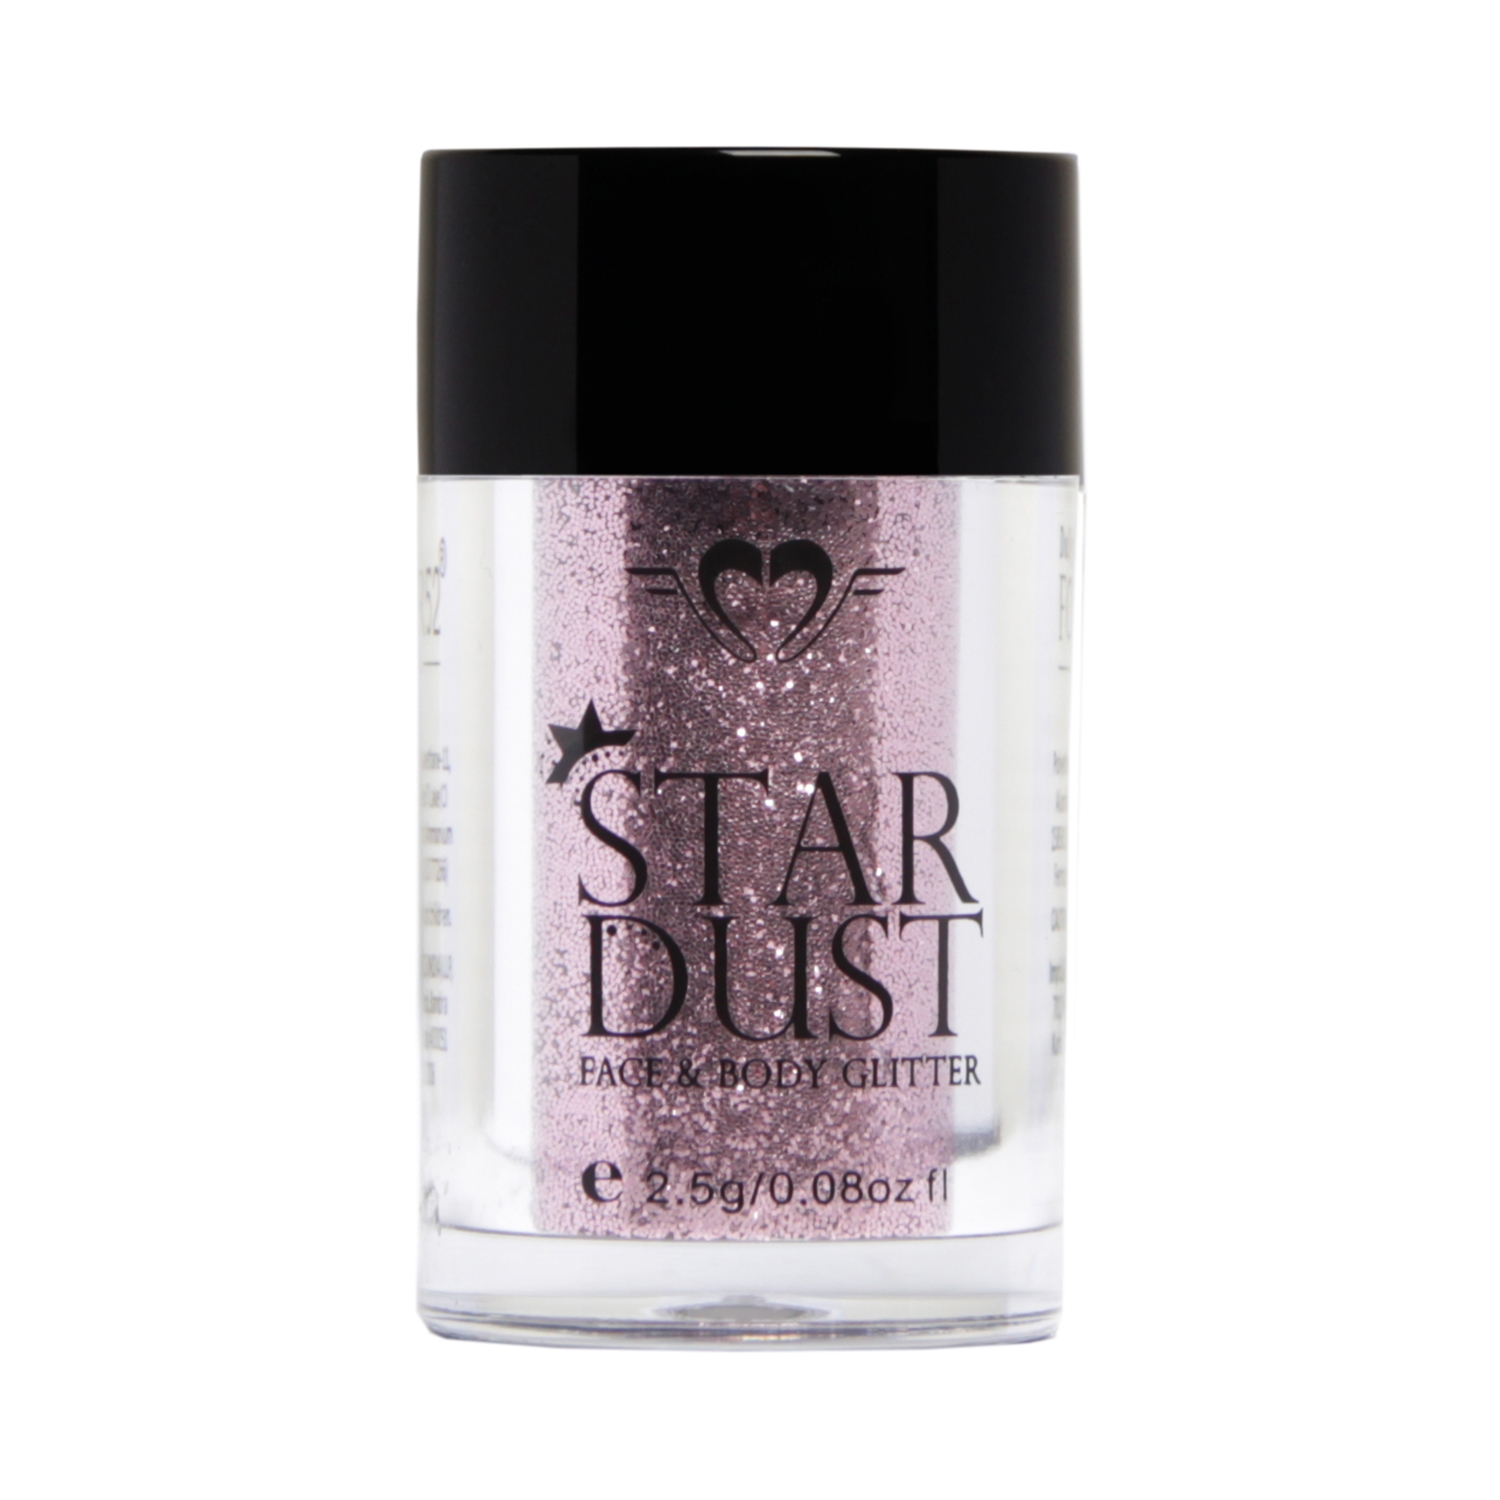 Daily Life Forever52 | Daily Life Forever52 STAR DUST Eyeshadow Glitter SD002 (3gm)